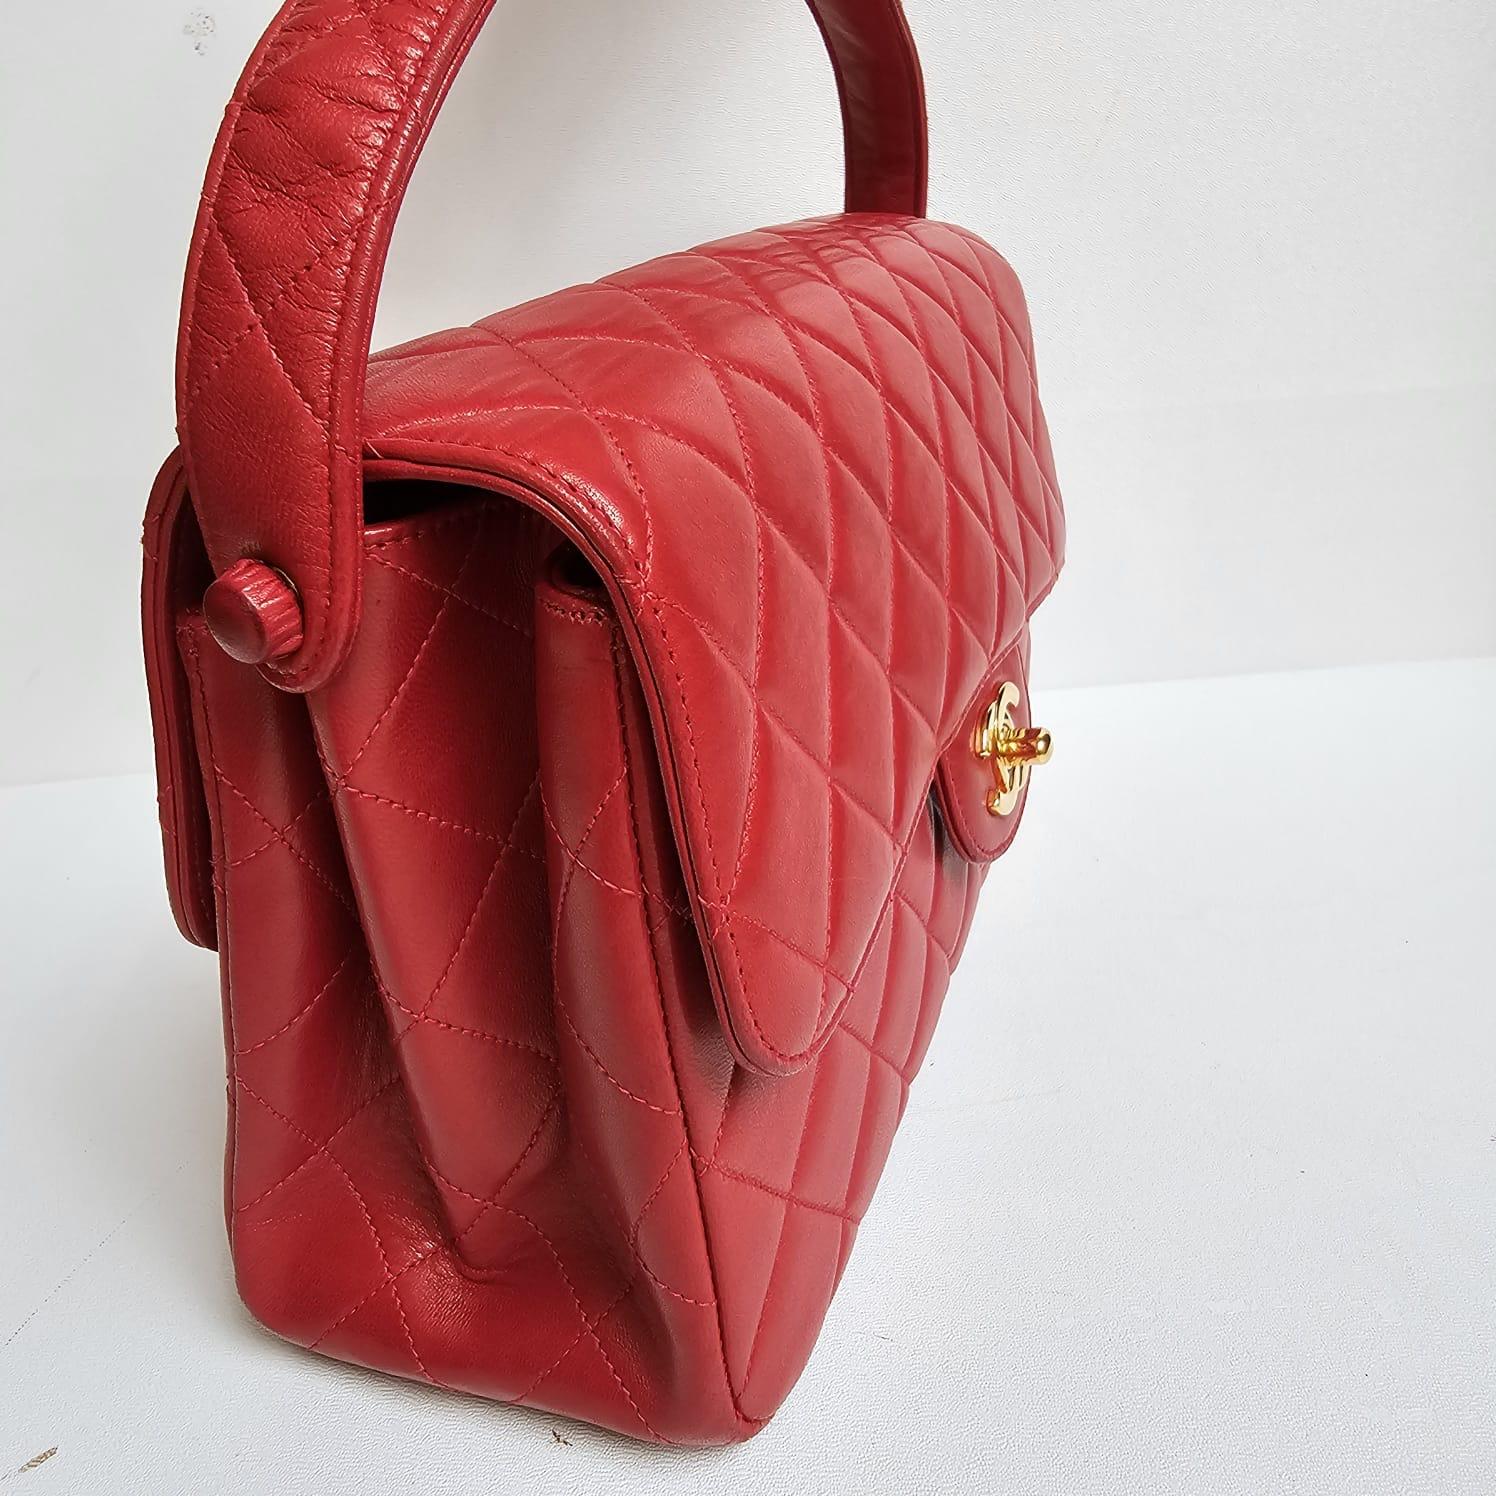 Chanel Vintage Red Lambskin Medium Quilted Double Face Top Handle Bag In Good Condition For Sale In Jakarta, Daerah Khusus Ibukota Jakarta